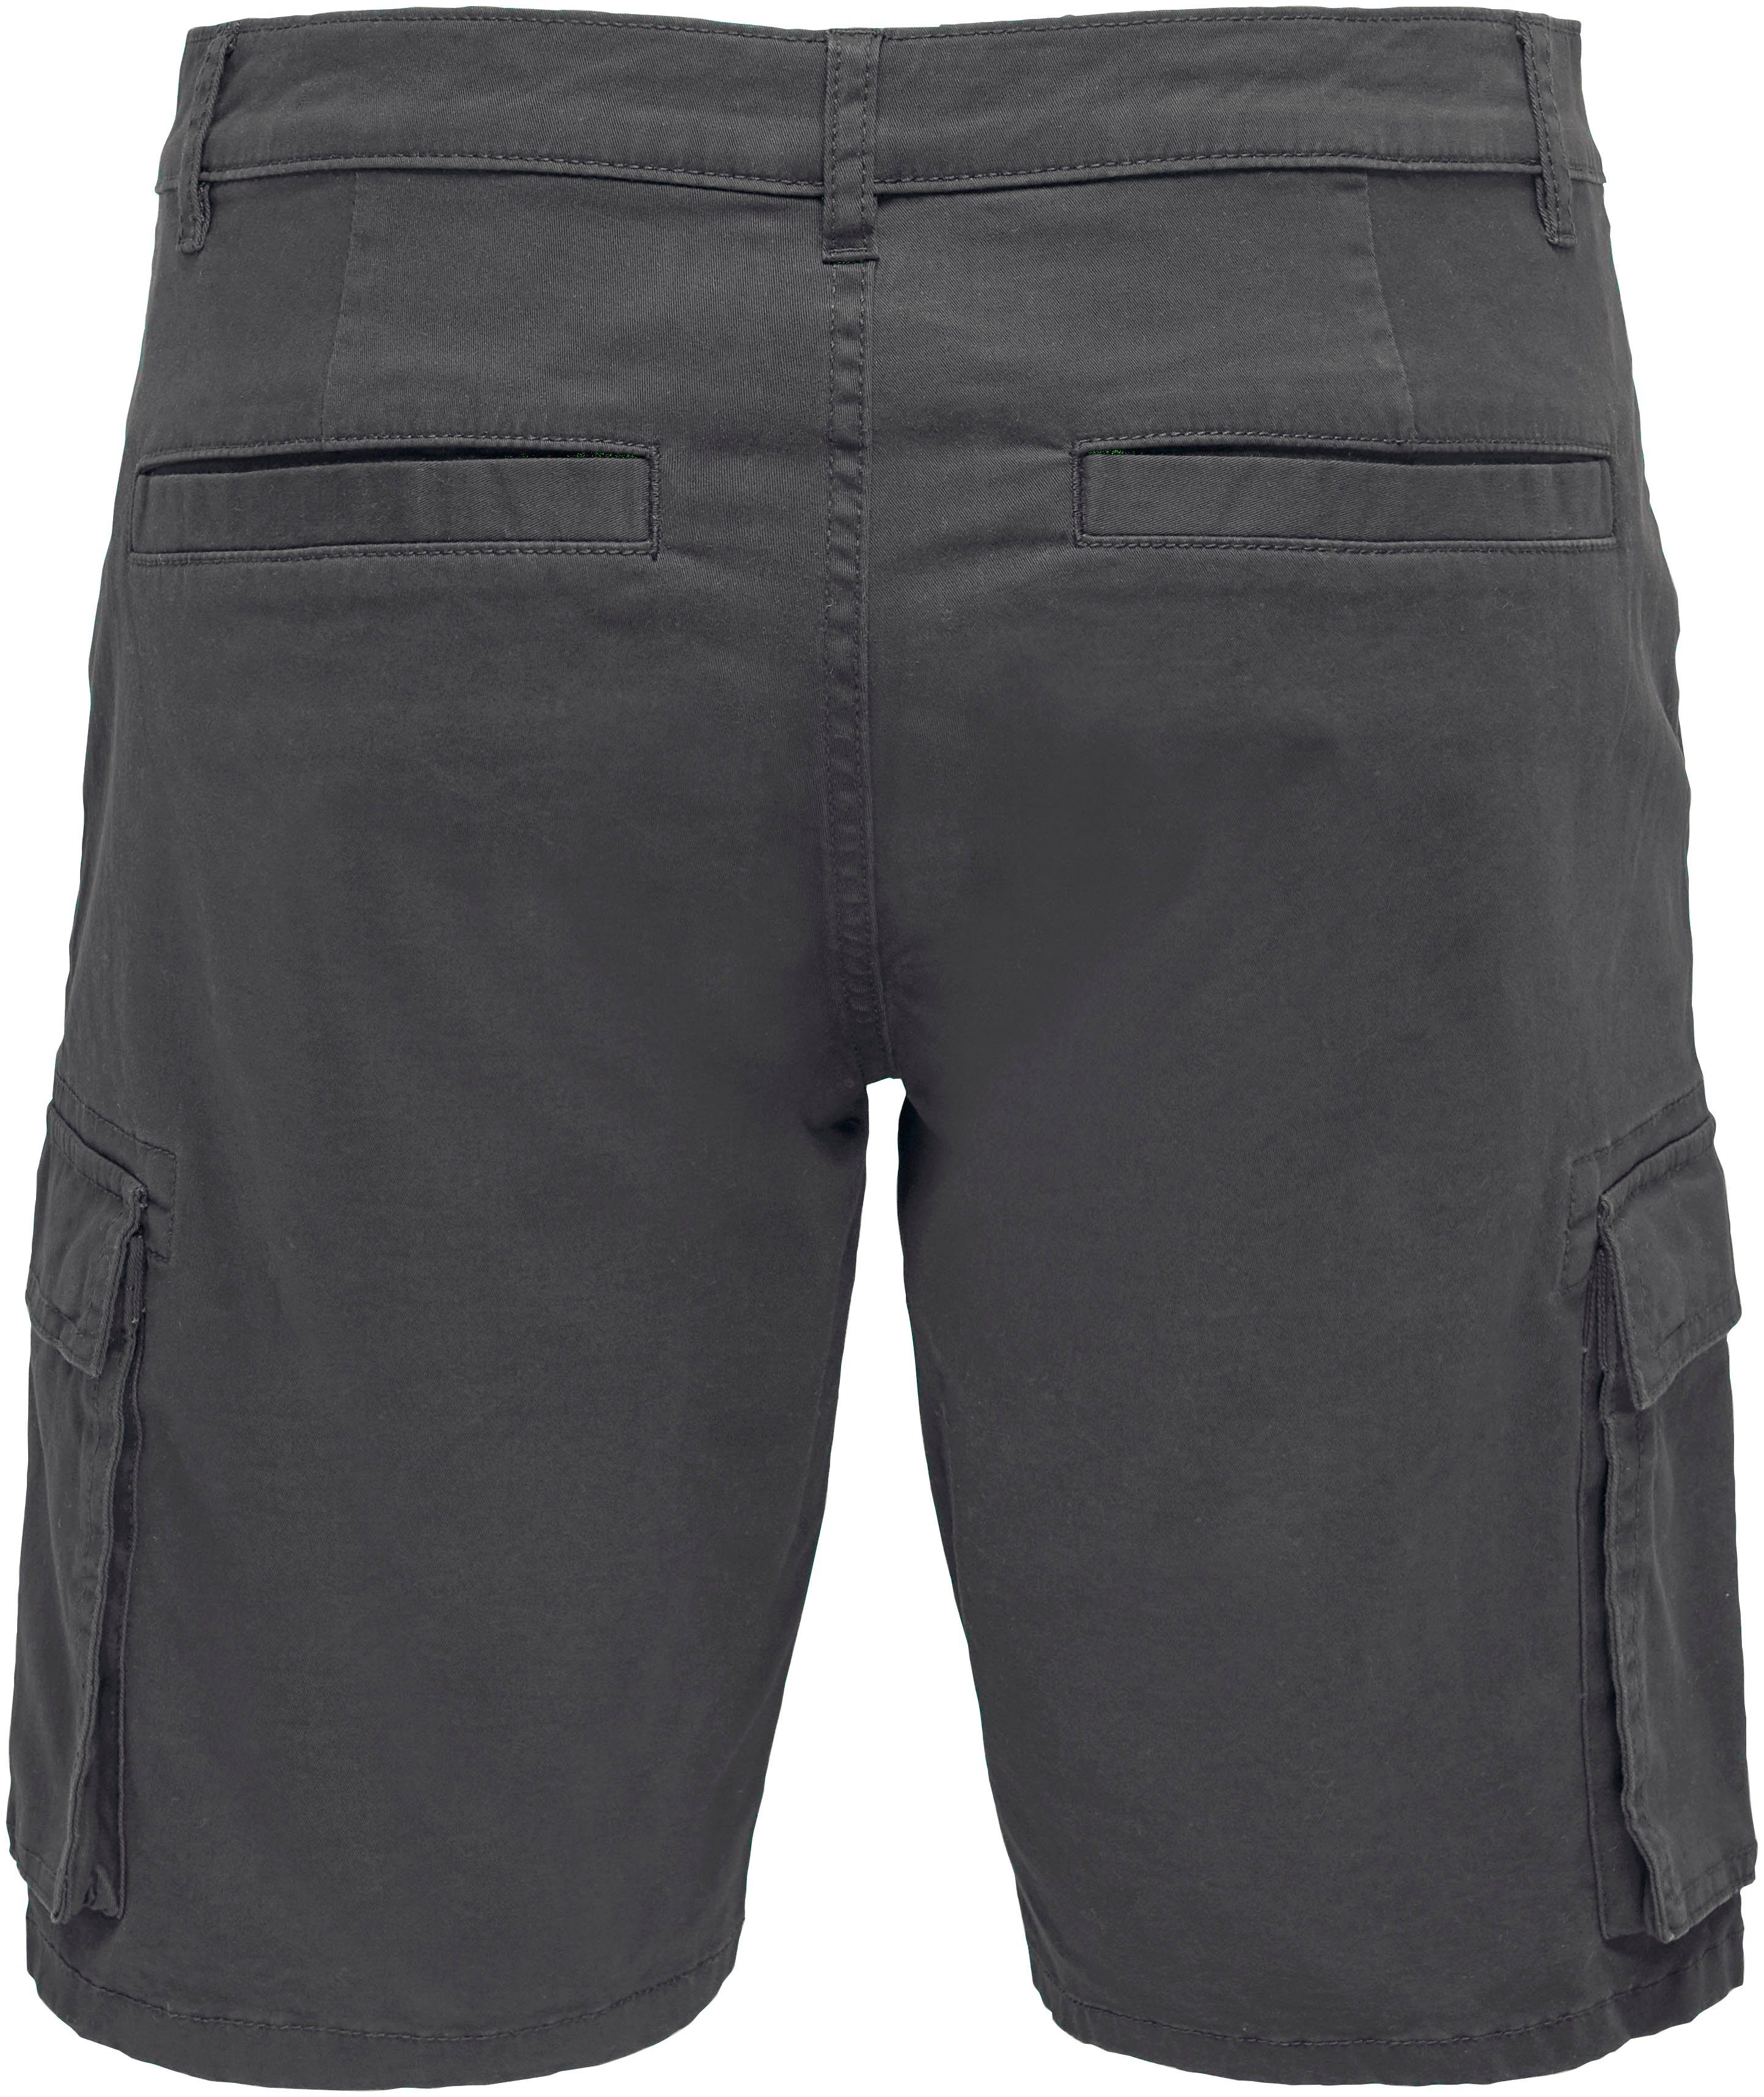 CAM CARGO SONS SHORTS STAGE Cargoshorts & ONLY grau